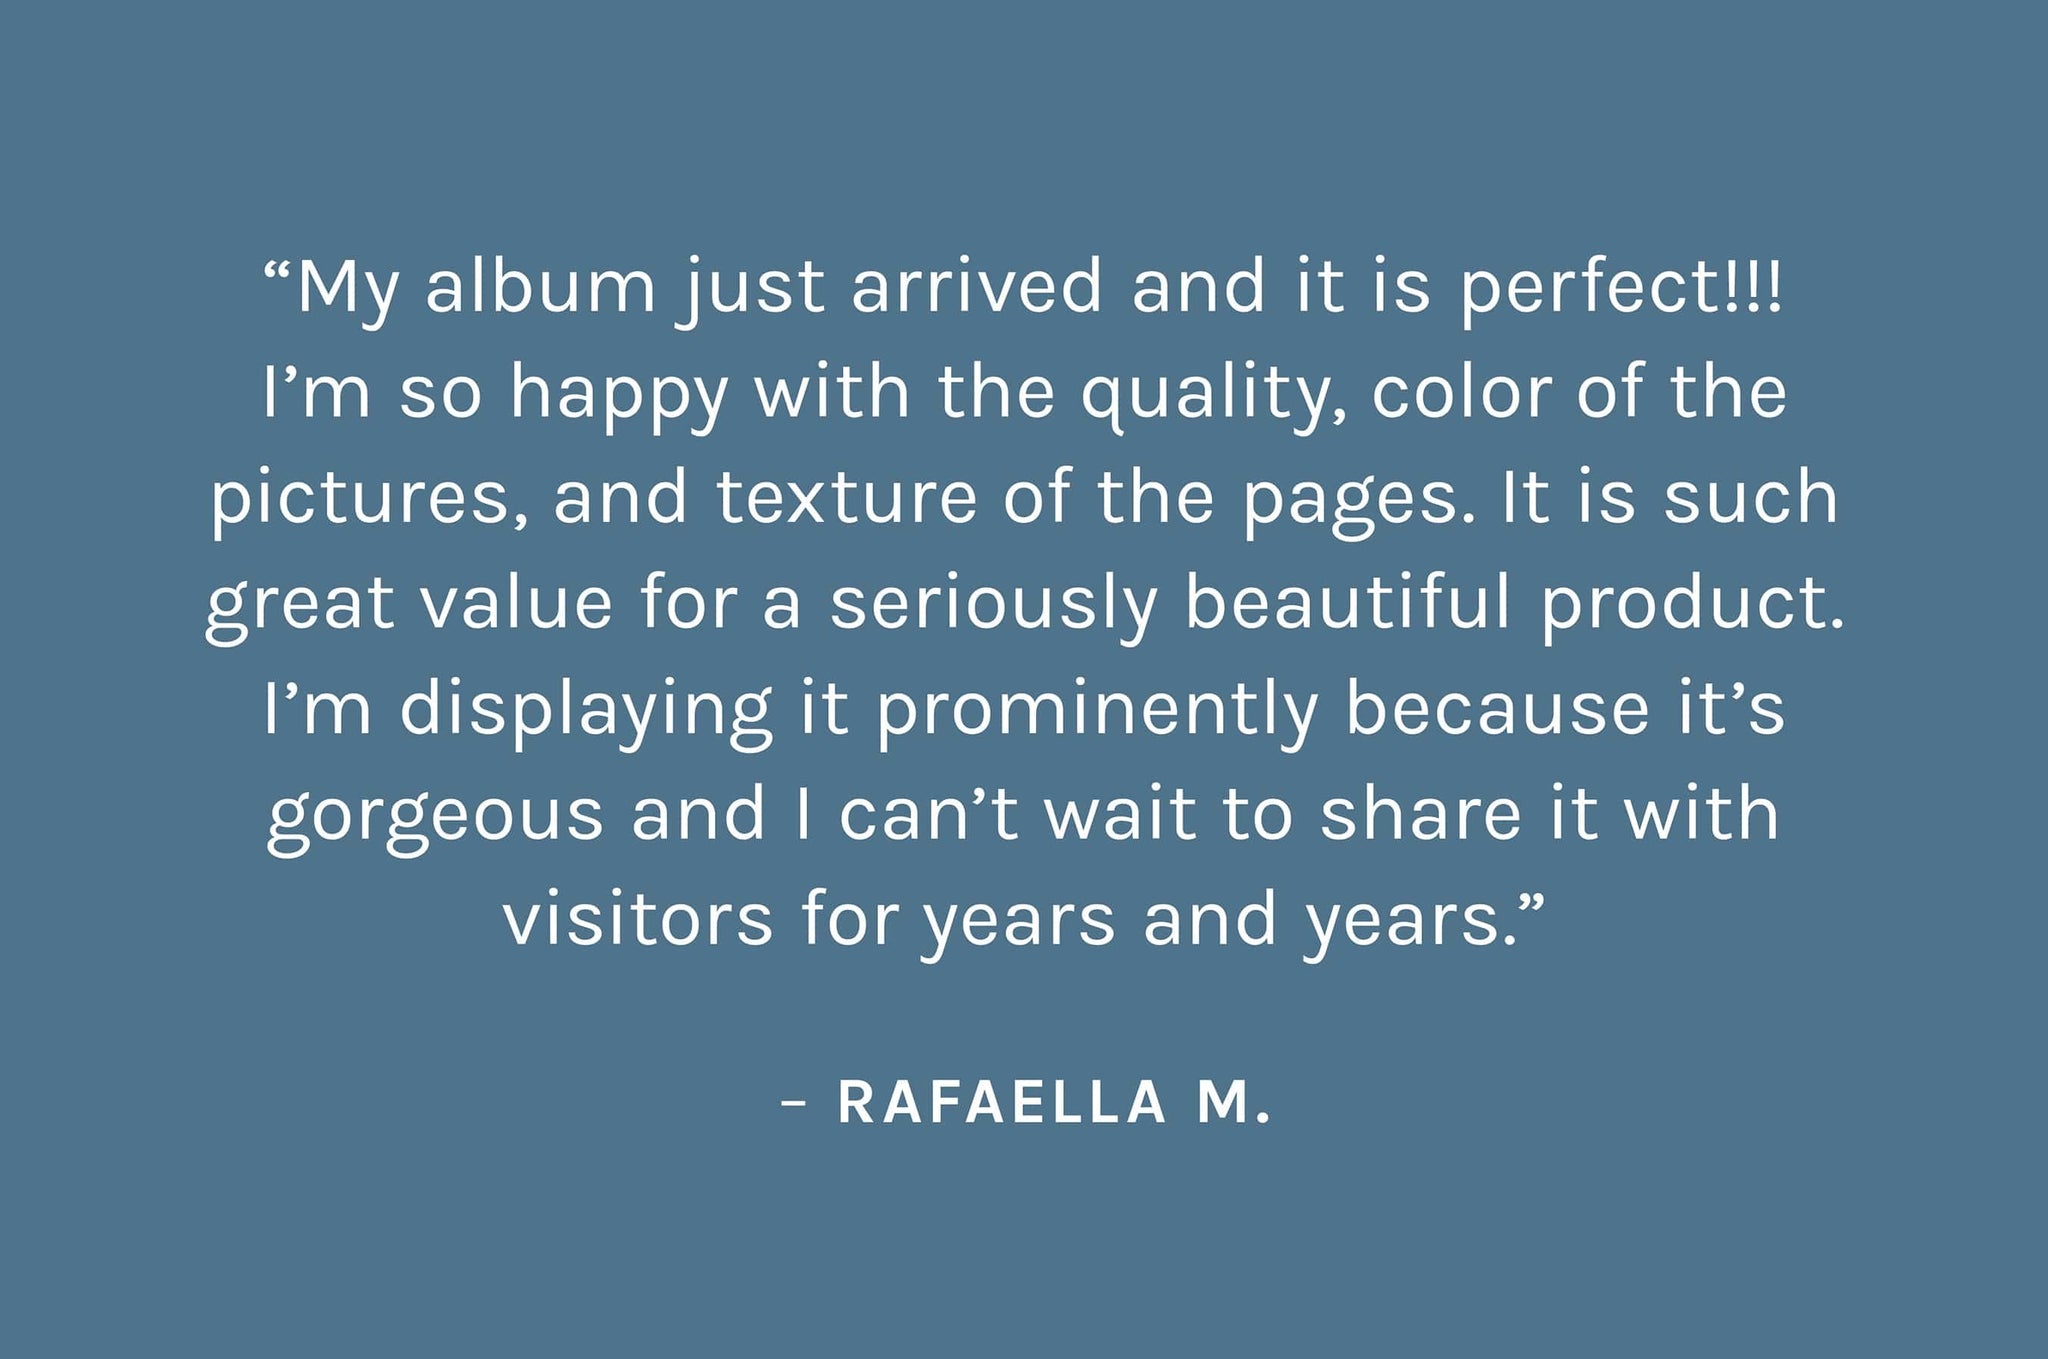 Customer review: My album just arrived and it is perfect!!! I’m so happy with the quality, color of the pictures, and texture of the pages. It is such great value for a seriously beautiful product. I’m displaying it prominently because it’s gorgeous and I can’t wait to share it with visitors for years and years. – Rafaella M.